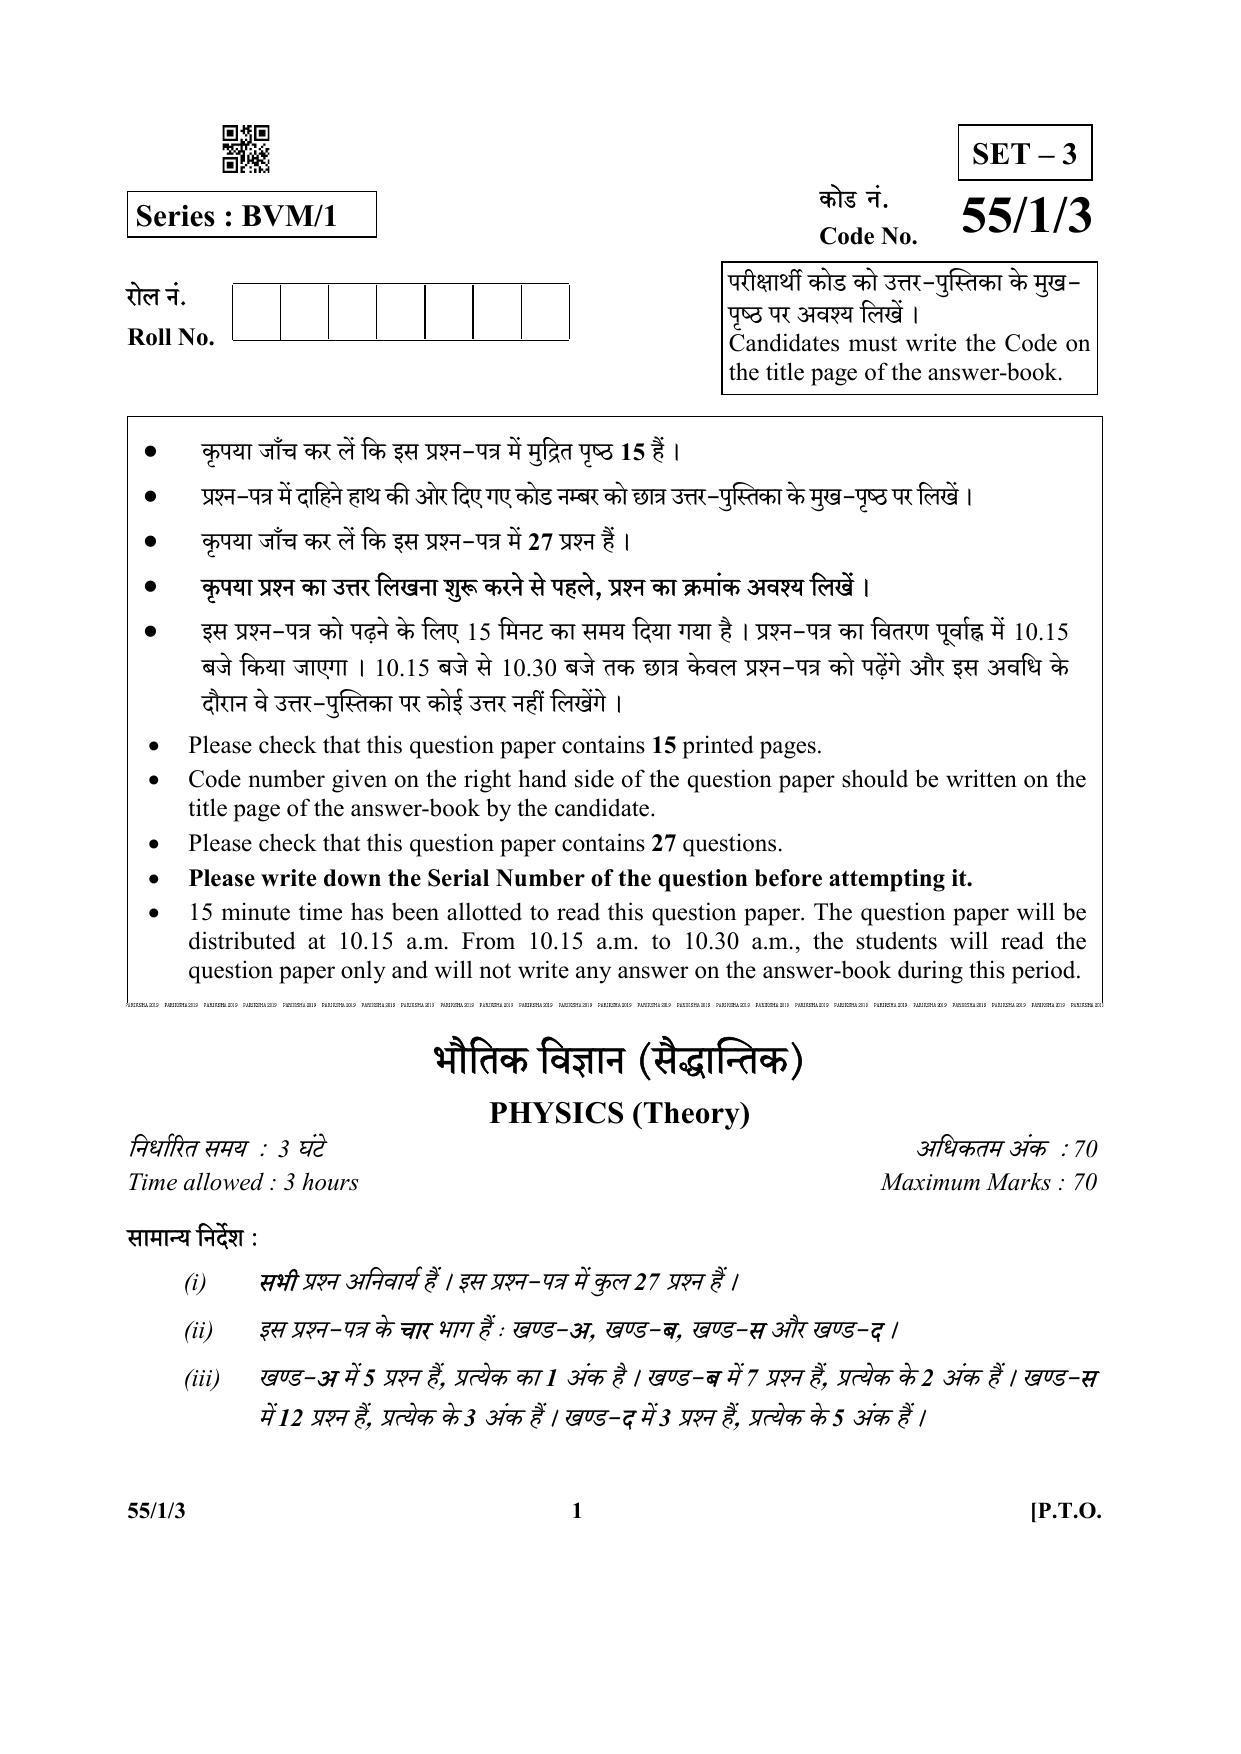 CBSE Class 12 55-1-3 (Physics) 2019 Question Paper - Page 1